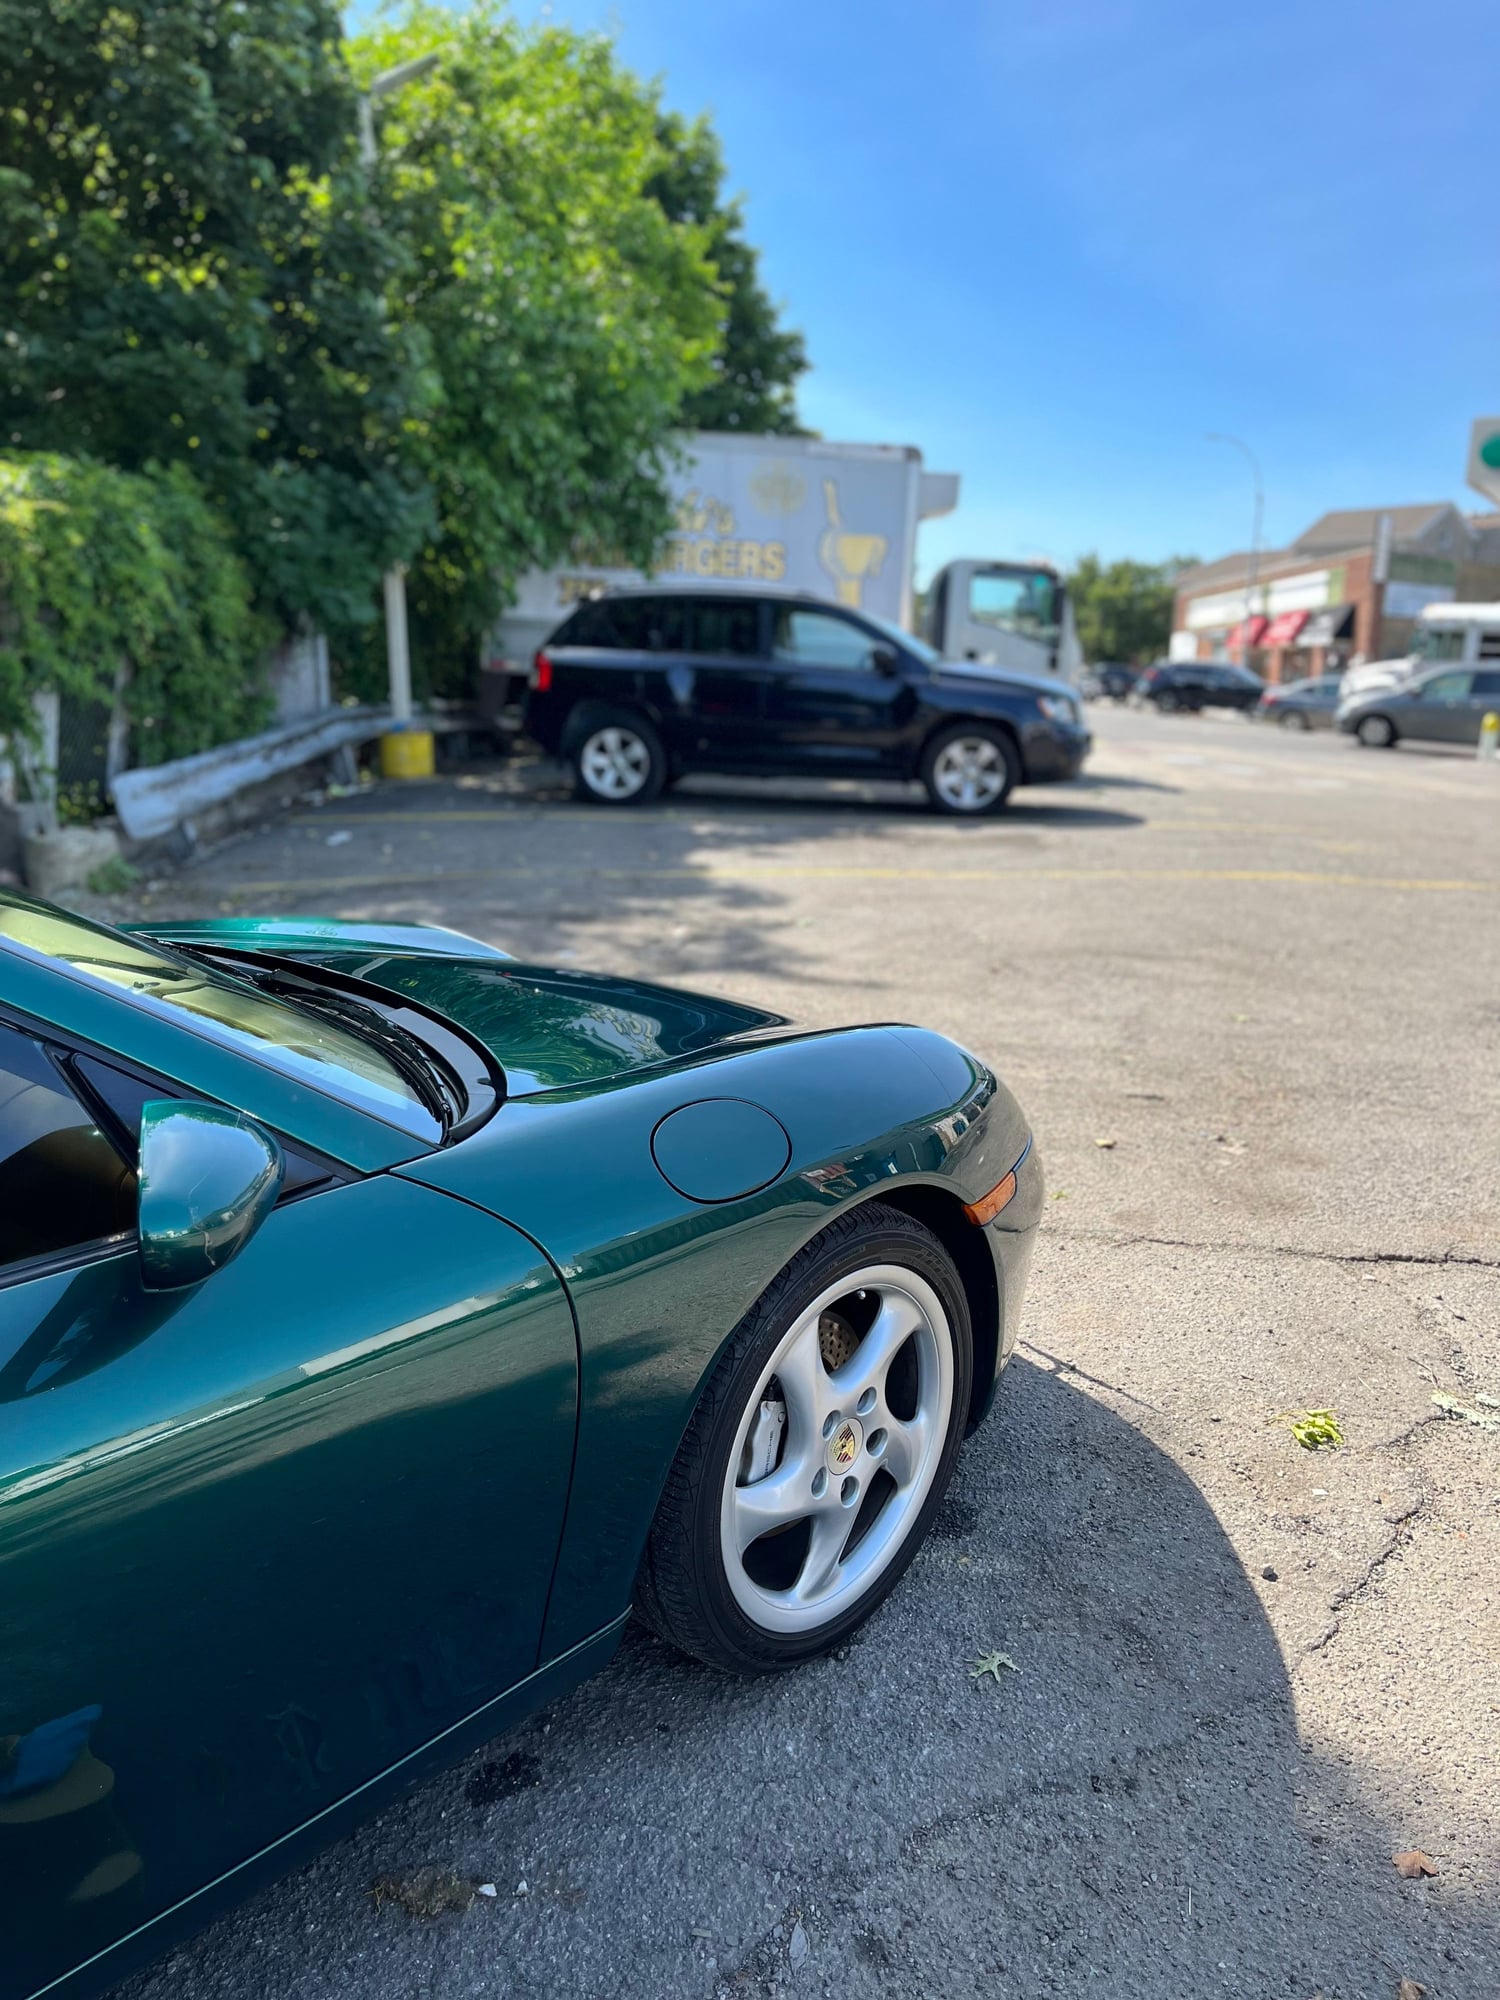 2001 Porsche 911 - 2001 Porsche 911 Carrera 4 -- Rainforest Green -- *IMS/RMS/CLUTCH/AOS* Recently Done - Used - VIN WP0AA29991S620883 - 186,000 Miles - 6 cyl - AWD - Manual - Coupe - Other - Queens, NY 11385, United States